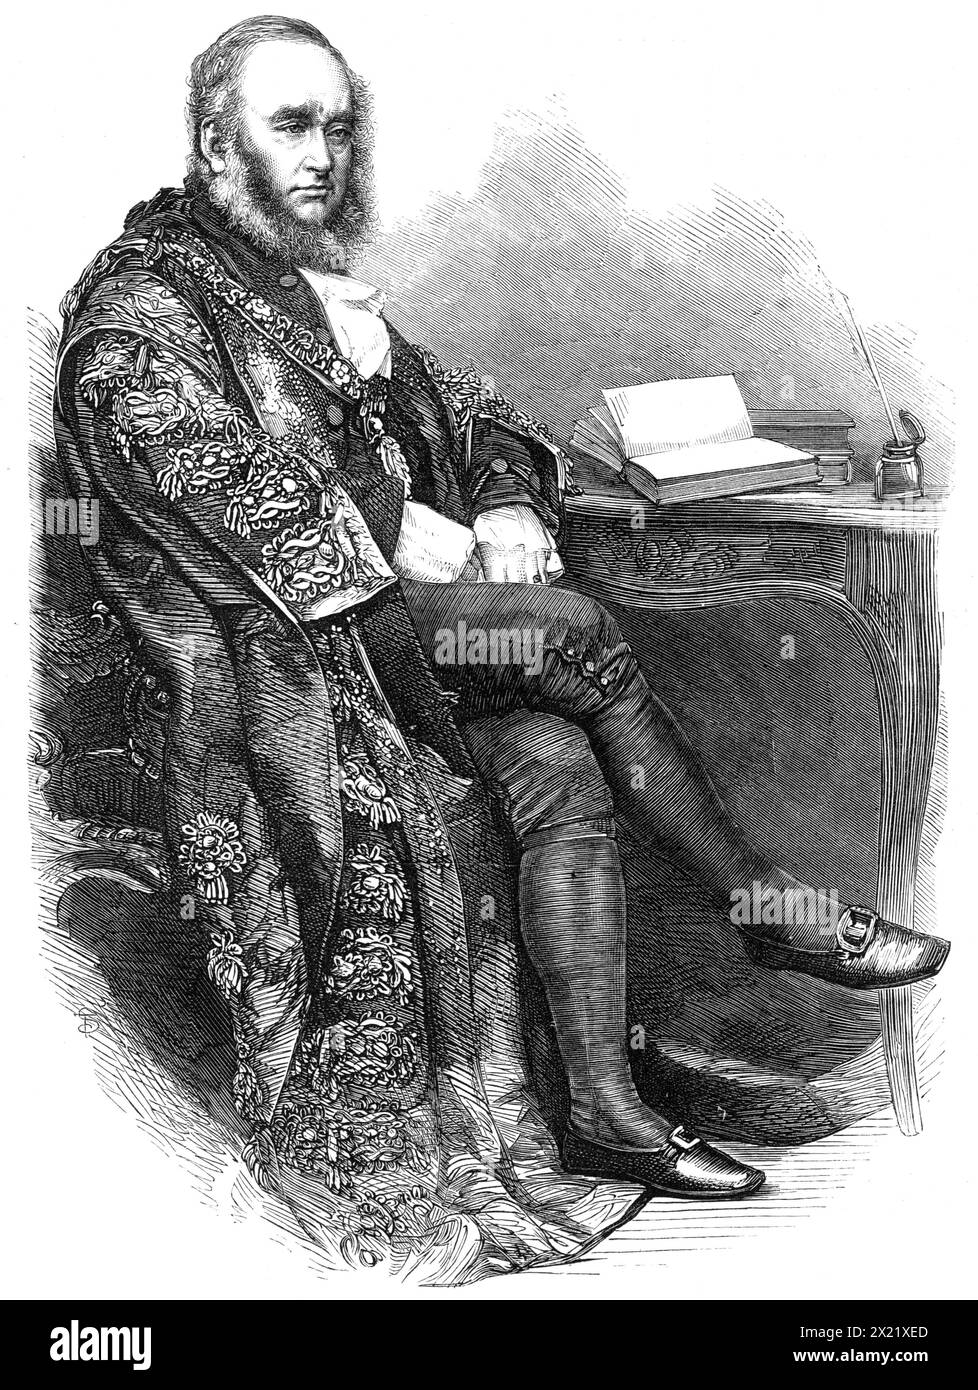 The Right Hon. Benjamin Samuel Phillips, the new Lord Mayor of London, 1865. Engraving from a photograph by Messrs. Mayall. 'Mr. Phillips...has been a member of the Common Council nearly twenty years, his first appearance there dating as far back as the year 1847, when he was returned as representative of the ward of Farringdon Within. He was at that time thirty-six years of age, and one of the firm of Faudel, Phillips, and Sons, Newgate-street, importers and manufacturers of embroidery and fancy wools, of which firm he is now the head. In his commercial dealings Mr. Phillips had proved himsel Stock Photo